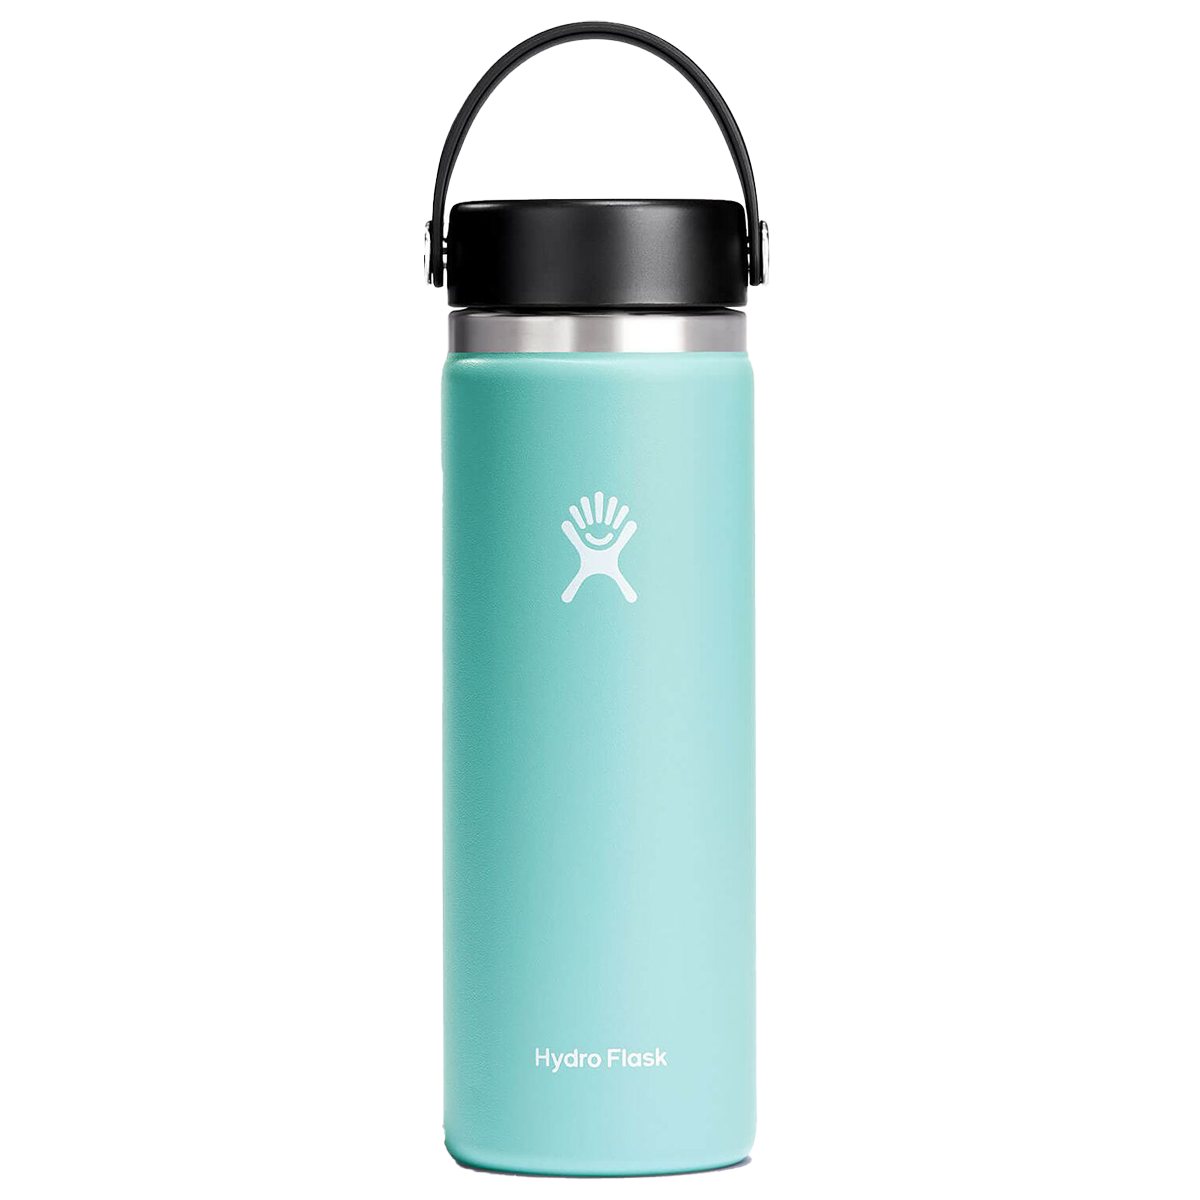  Owala FreeSip Insulated Stainless Steel Water Bottle with Straw  for Sports and Travel, BPA-Free, 24-oz, Blue/Teal (Denim) : Sports &  Outdoors